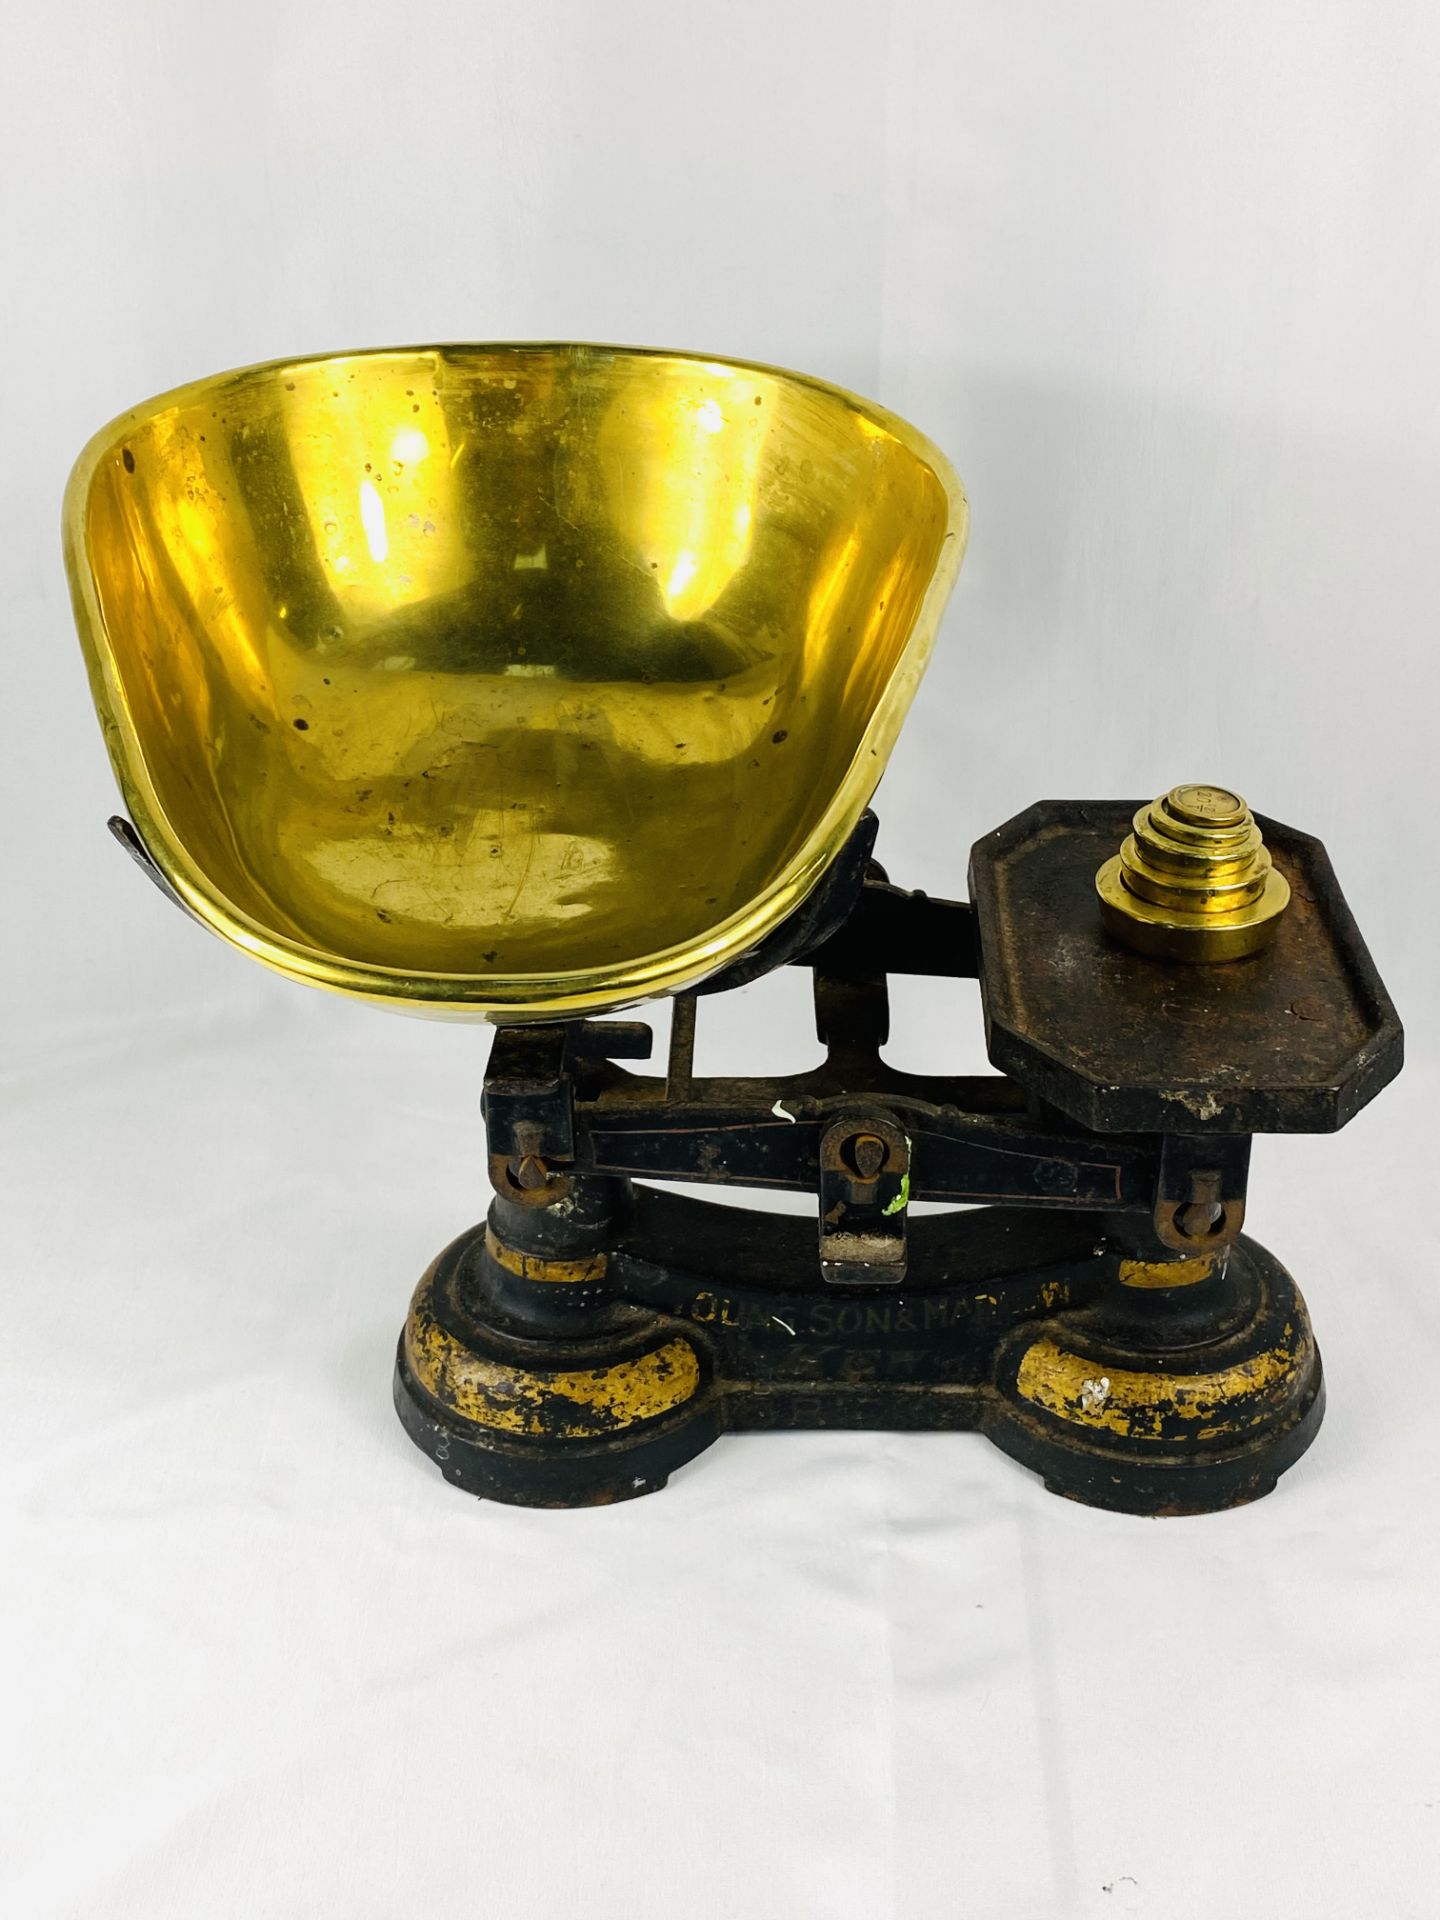 Set of Young Son and Matthew scales with brass bowl and weights,